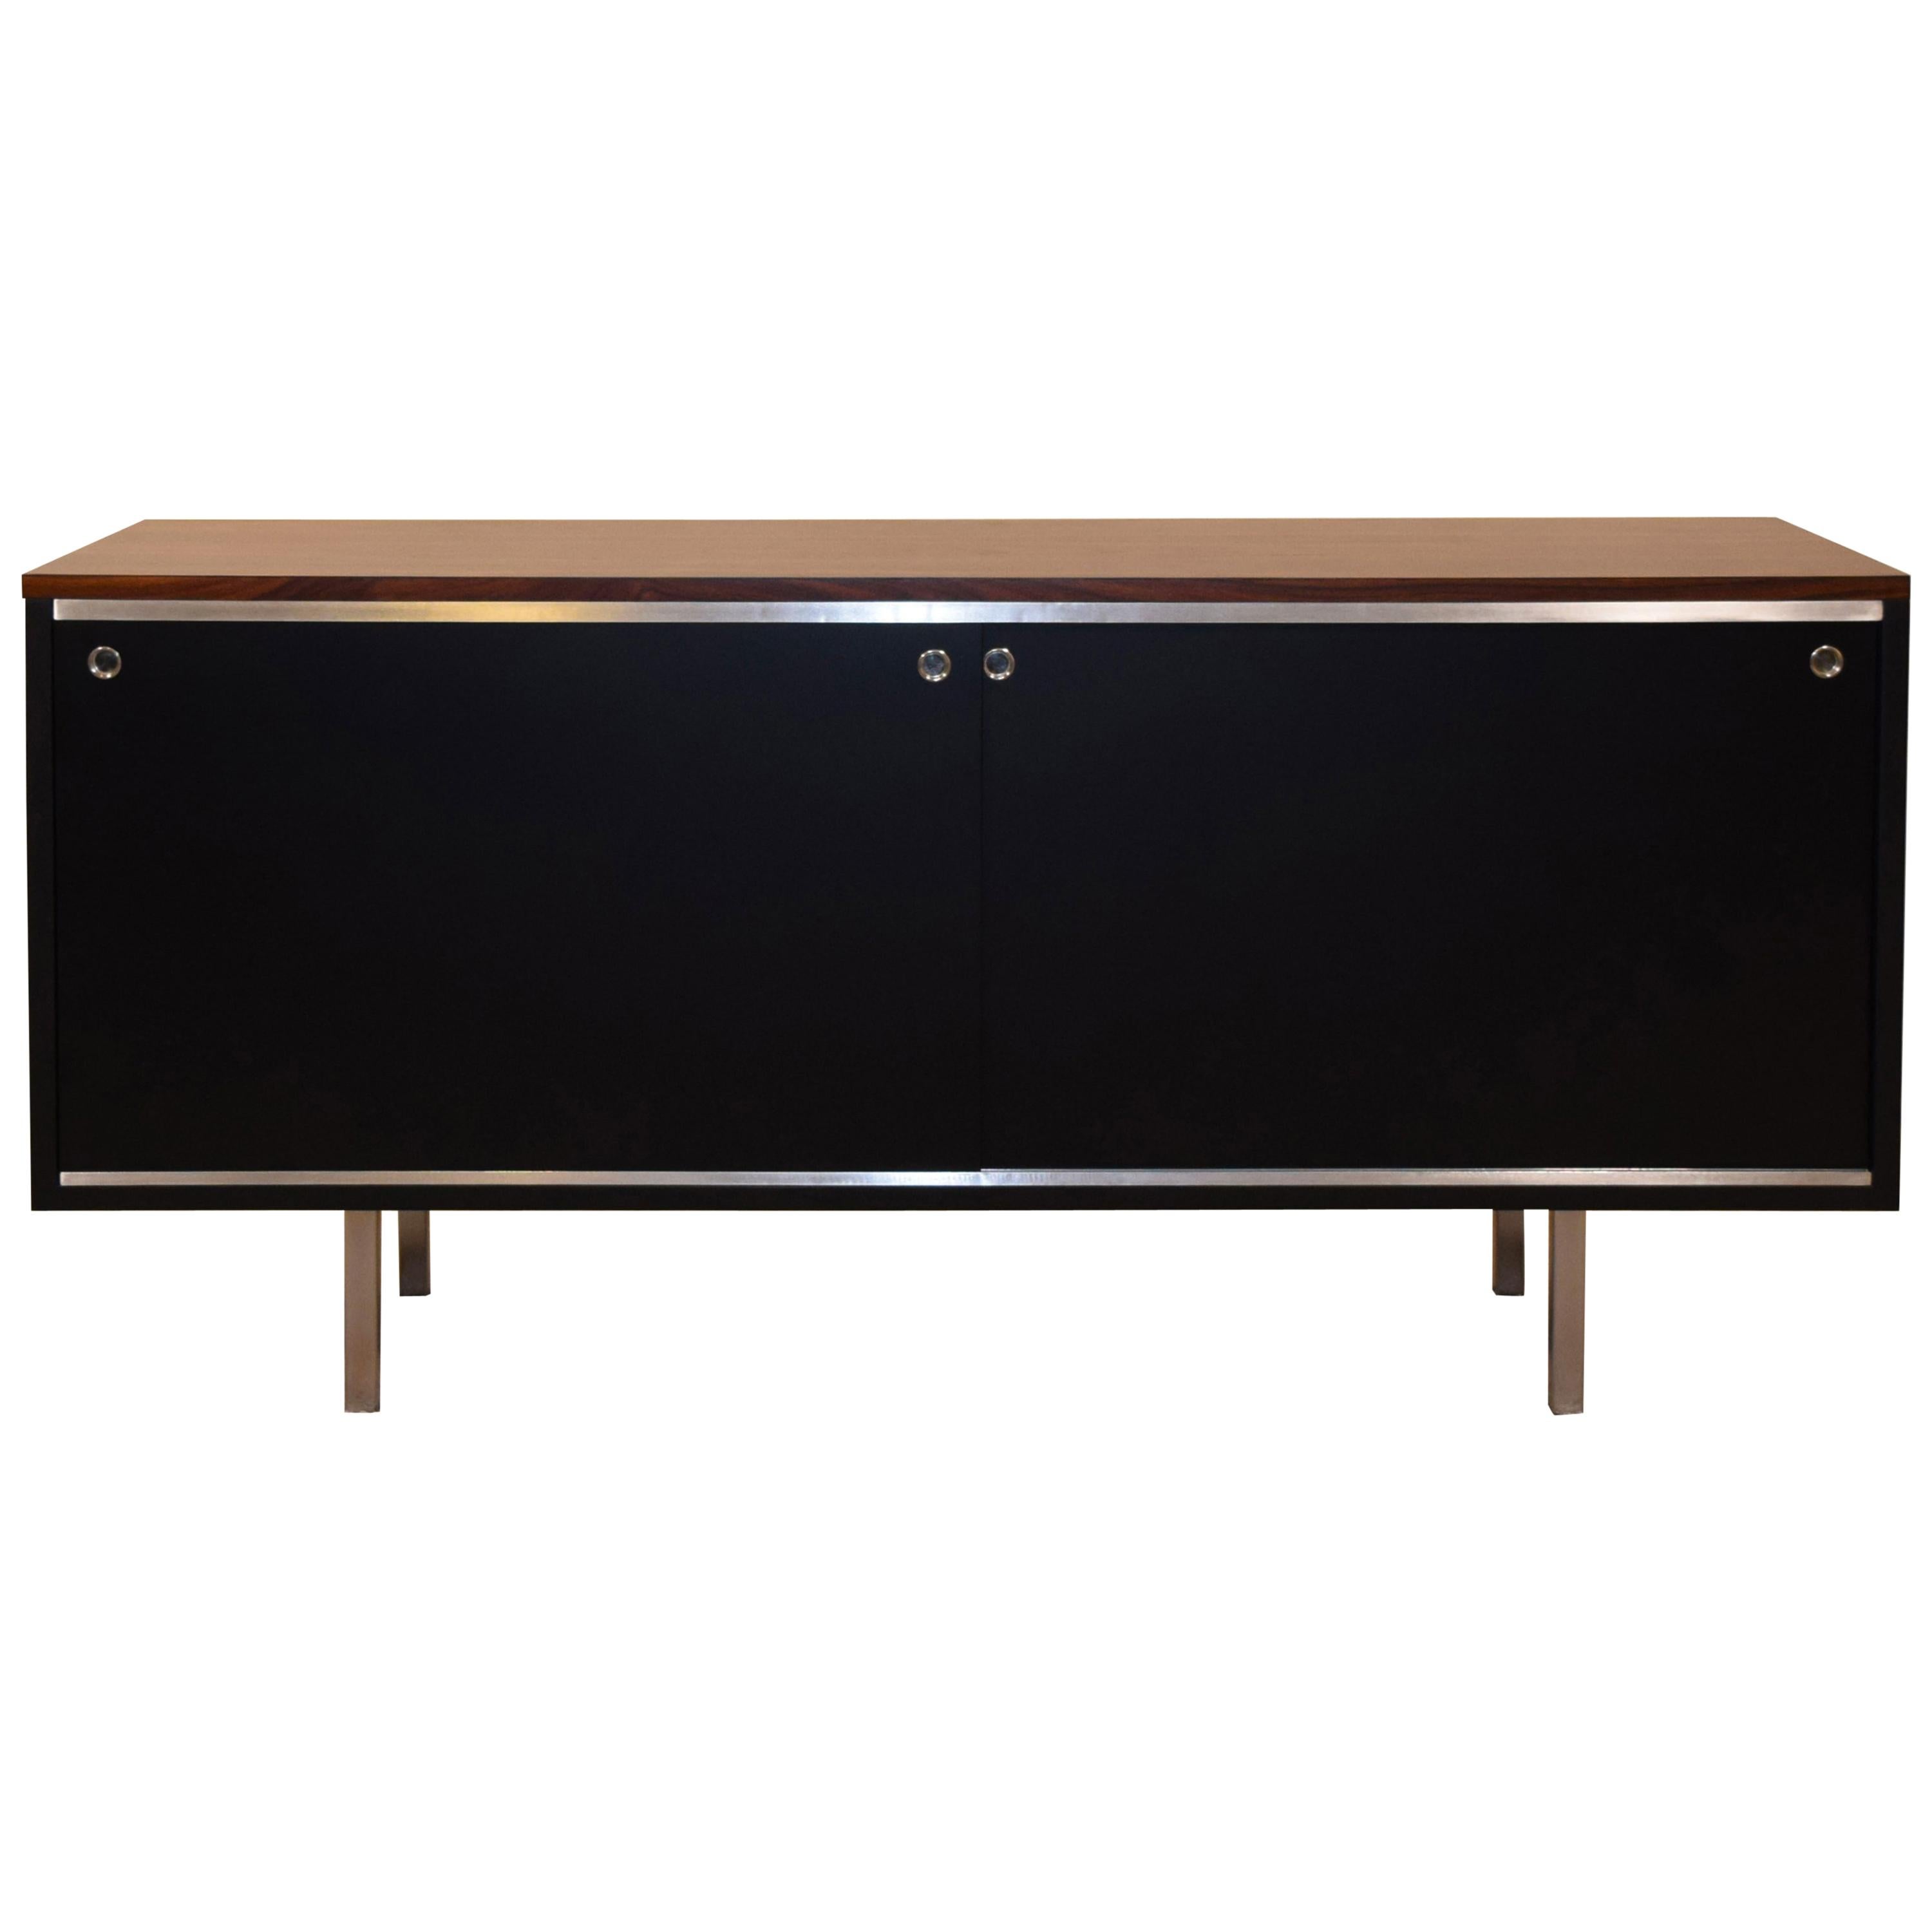 Early credenza with black shell and rosewood top, circa 1952. Measures 55.5